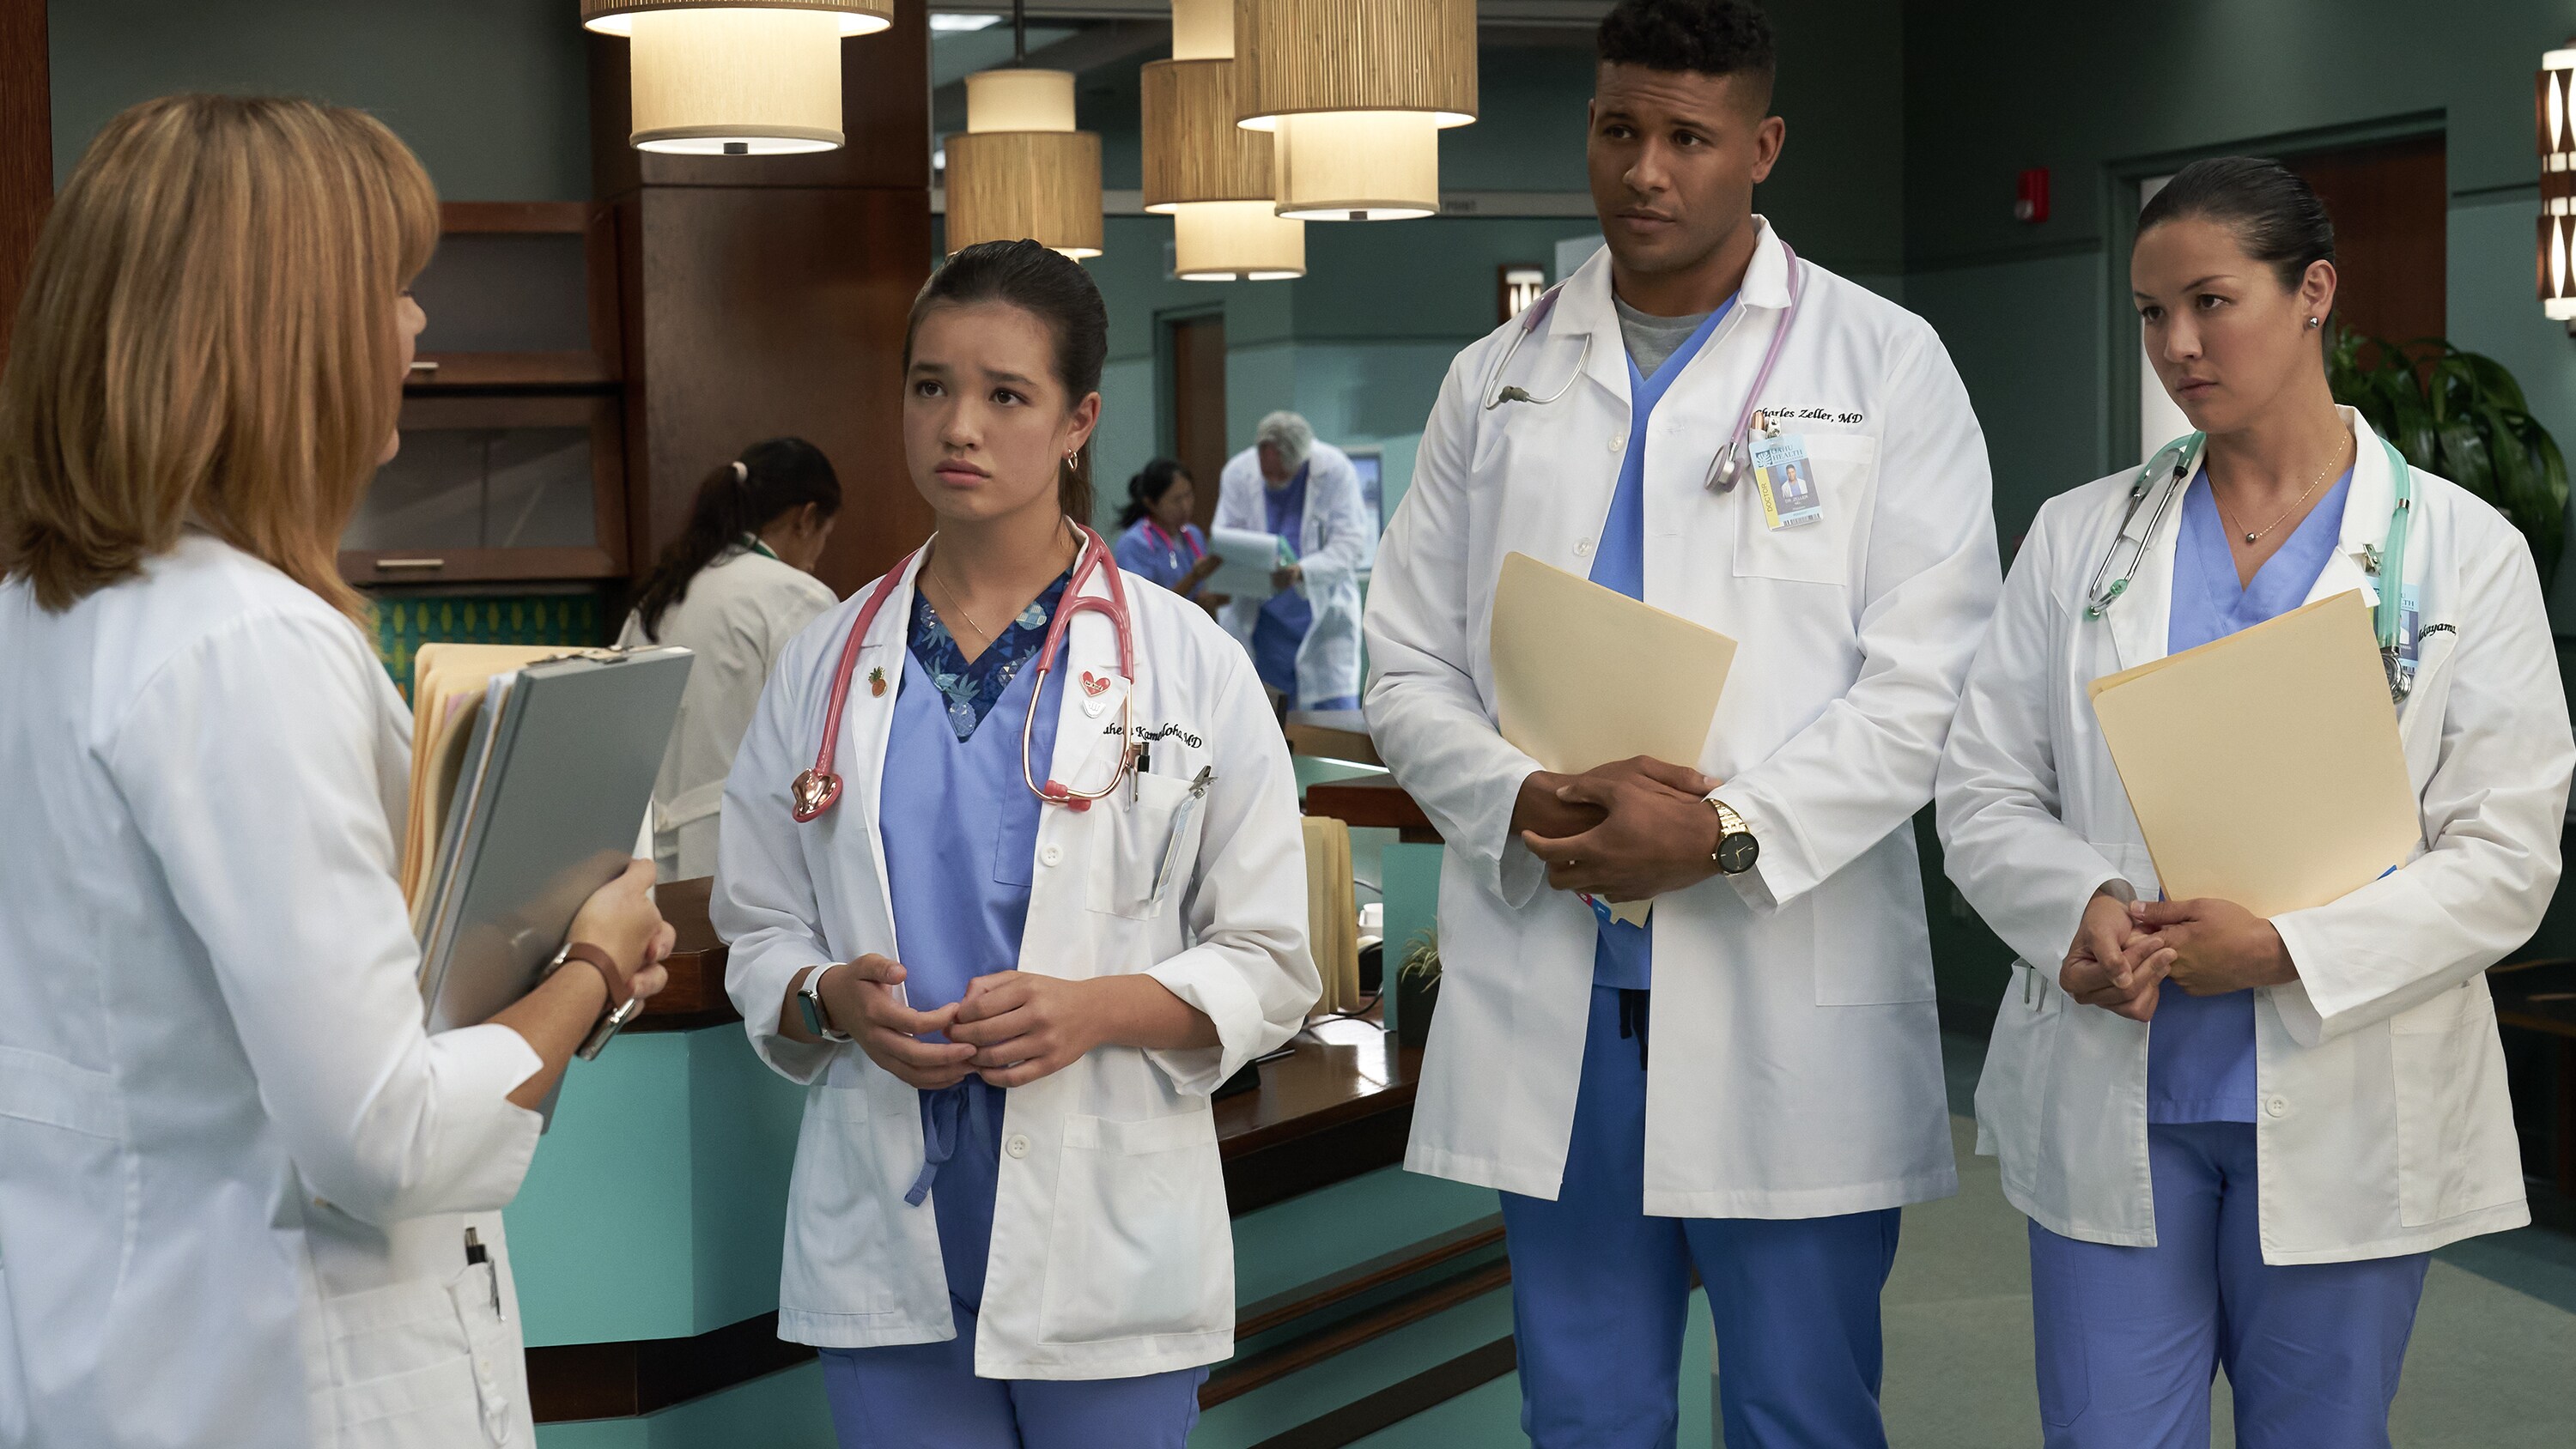 DOOGIE KAMEALOHA, M.D. - "Love Is a Mystery" - Lahela tackles two mysteries: the root cause of a tourist’s sudden paralysis and Walter’s feelings. (Disney/Karen Neal) PEYTON ELIZABETH LEE, JEFFREY BOWYER- CHAPMAN, MAPUANA MAKIA